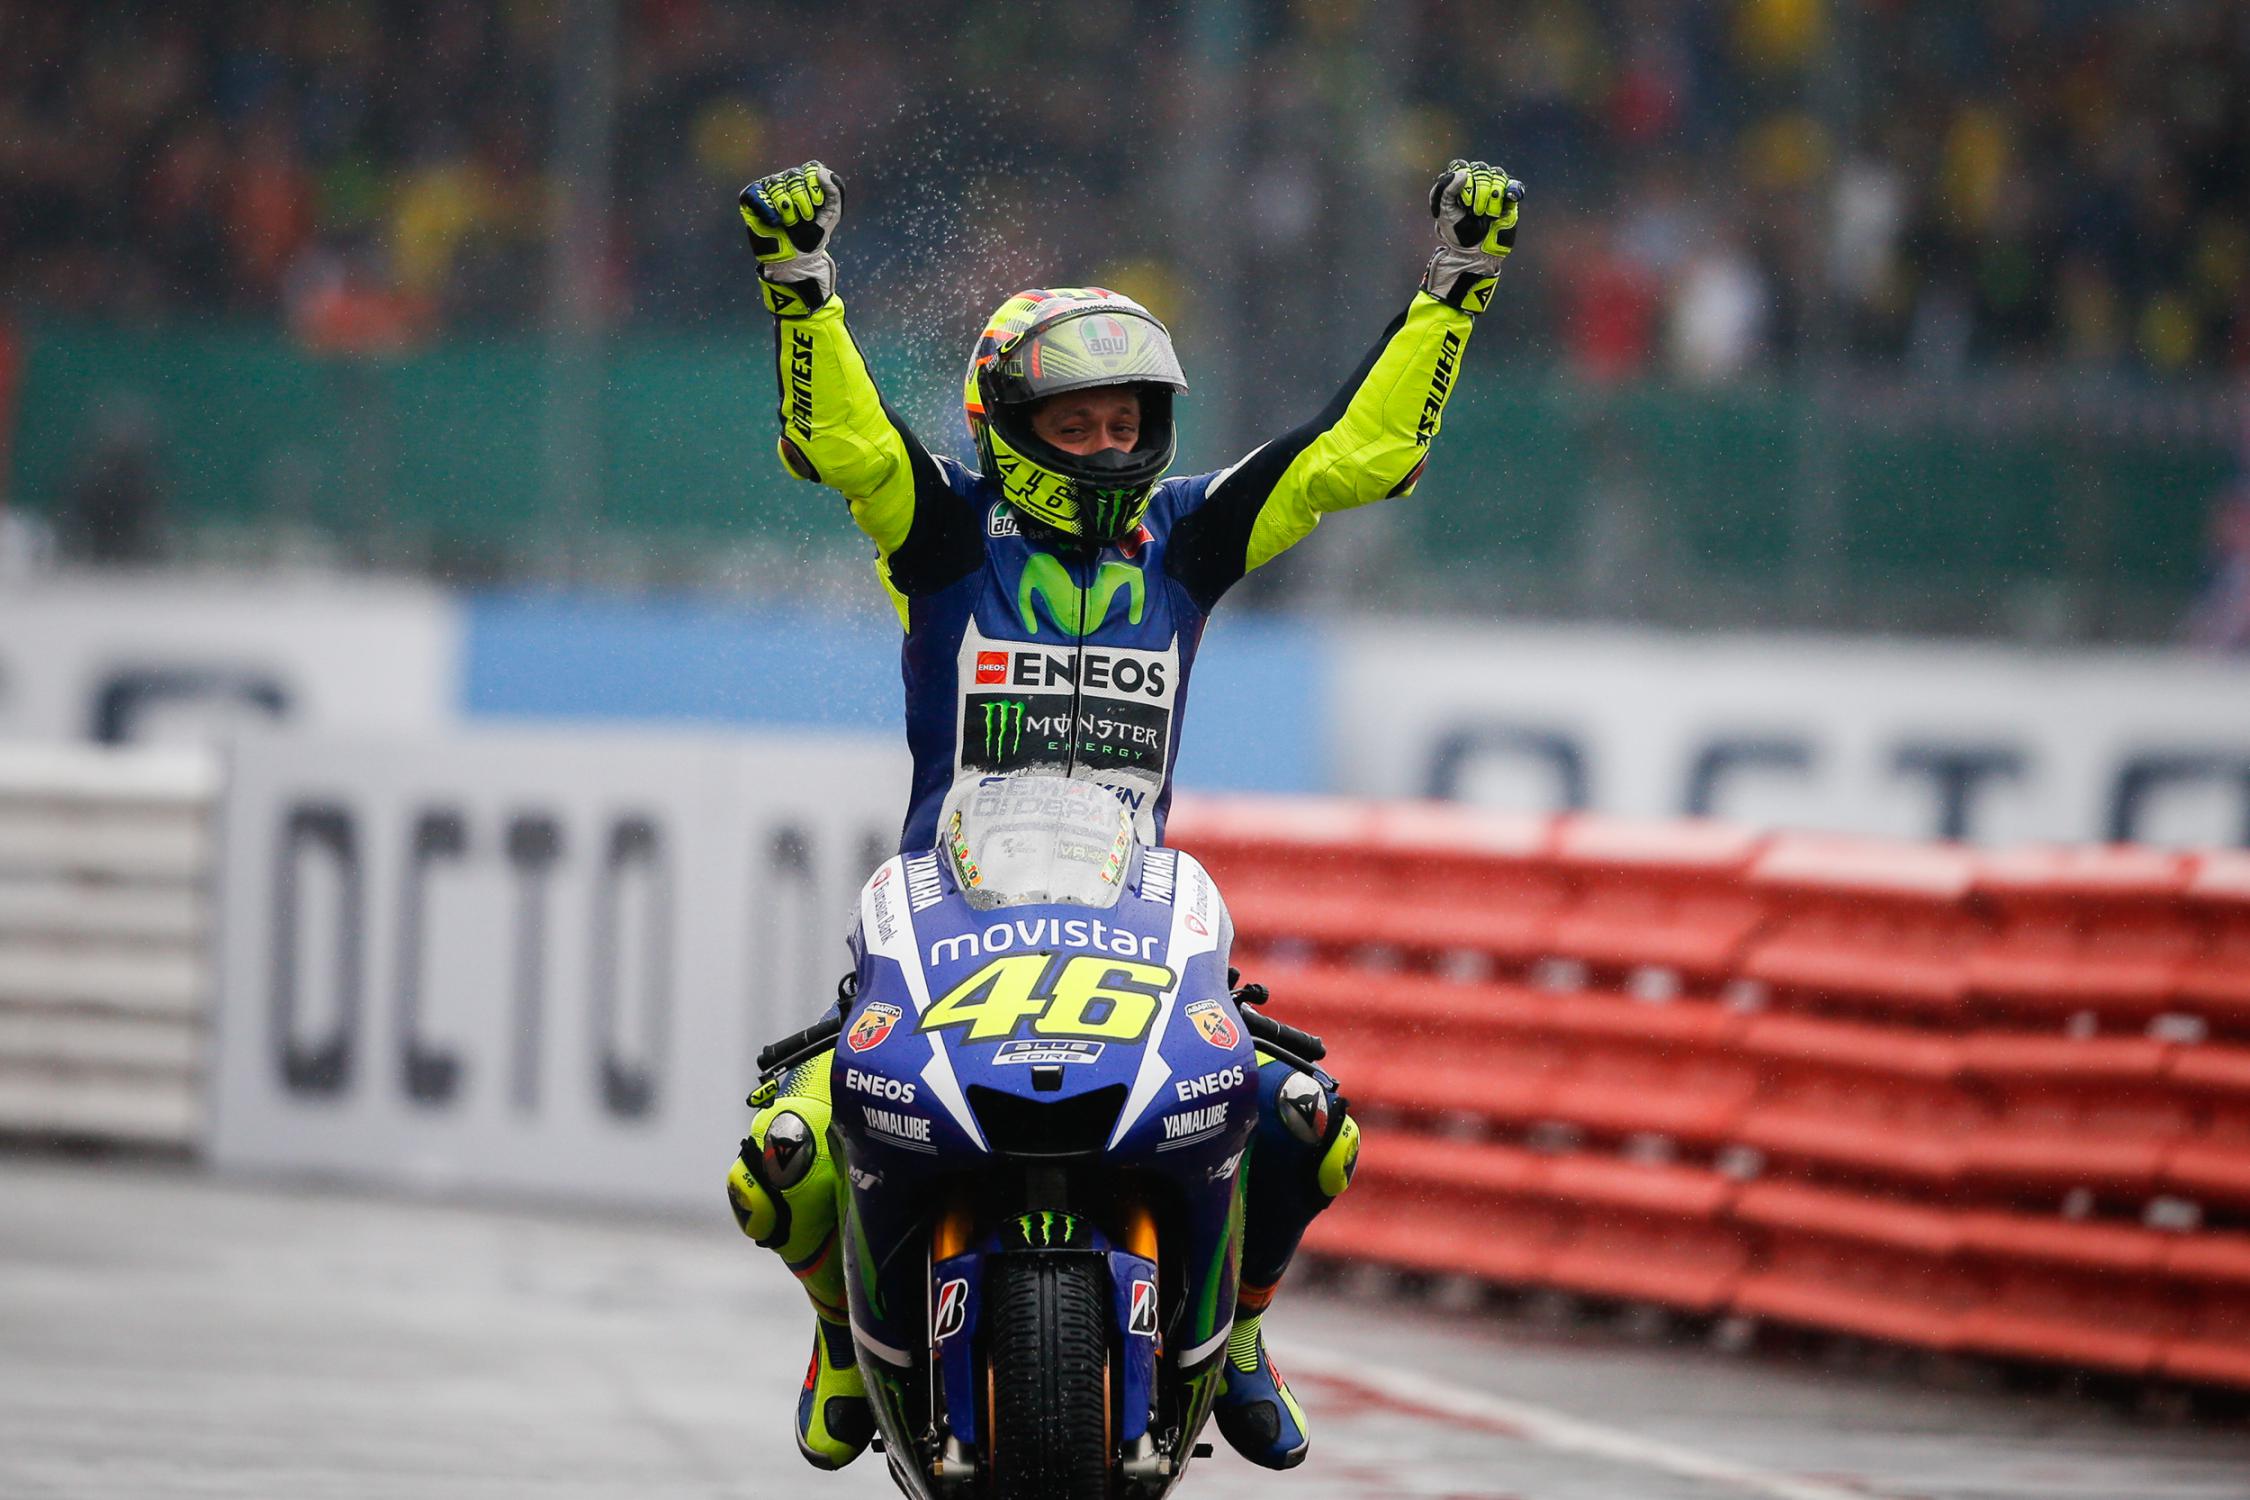 Rossi Wins at Soaked Silverstone, Ducati Again on the Podium